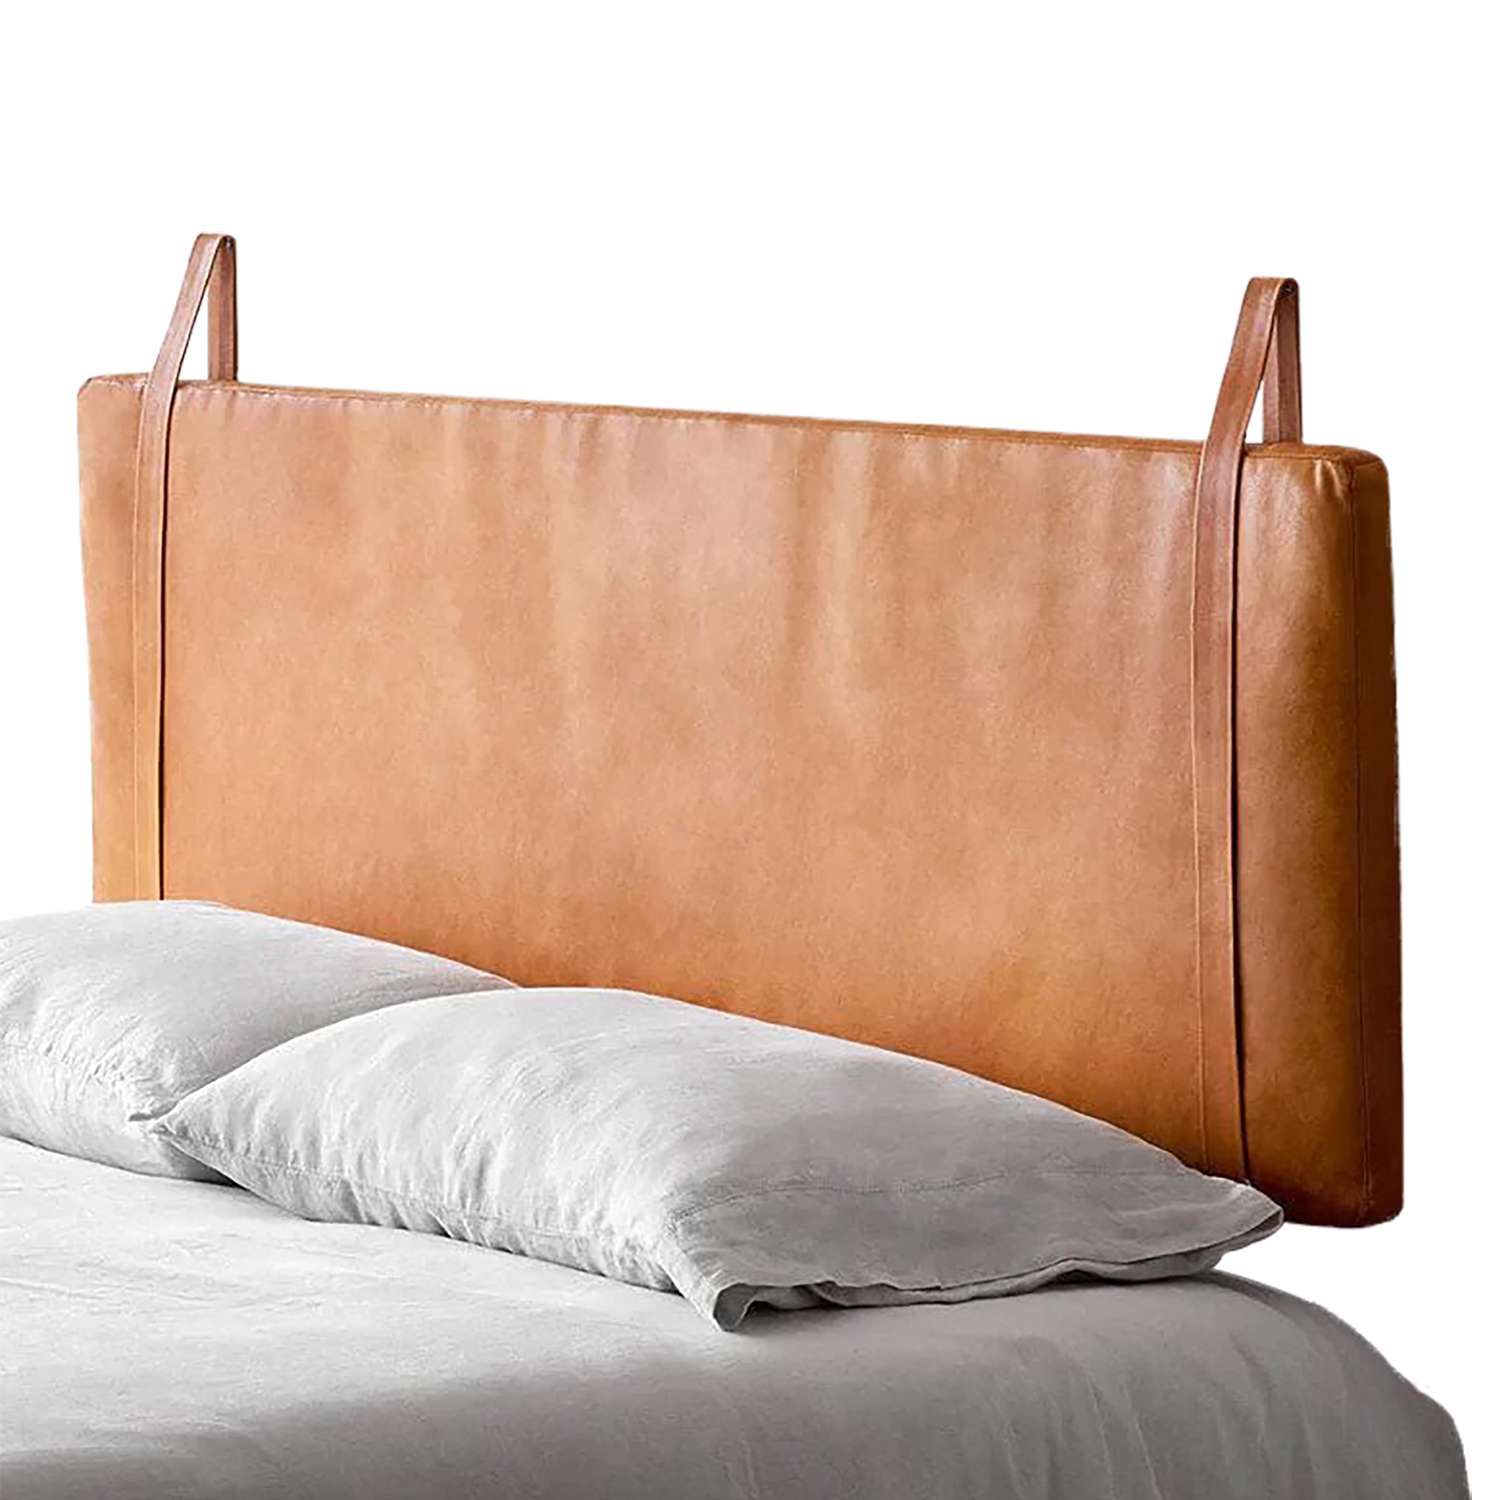 The Citizenry Hanging Leather Headboard